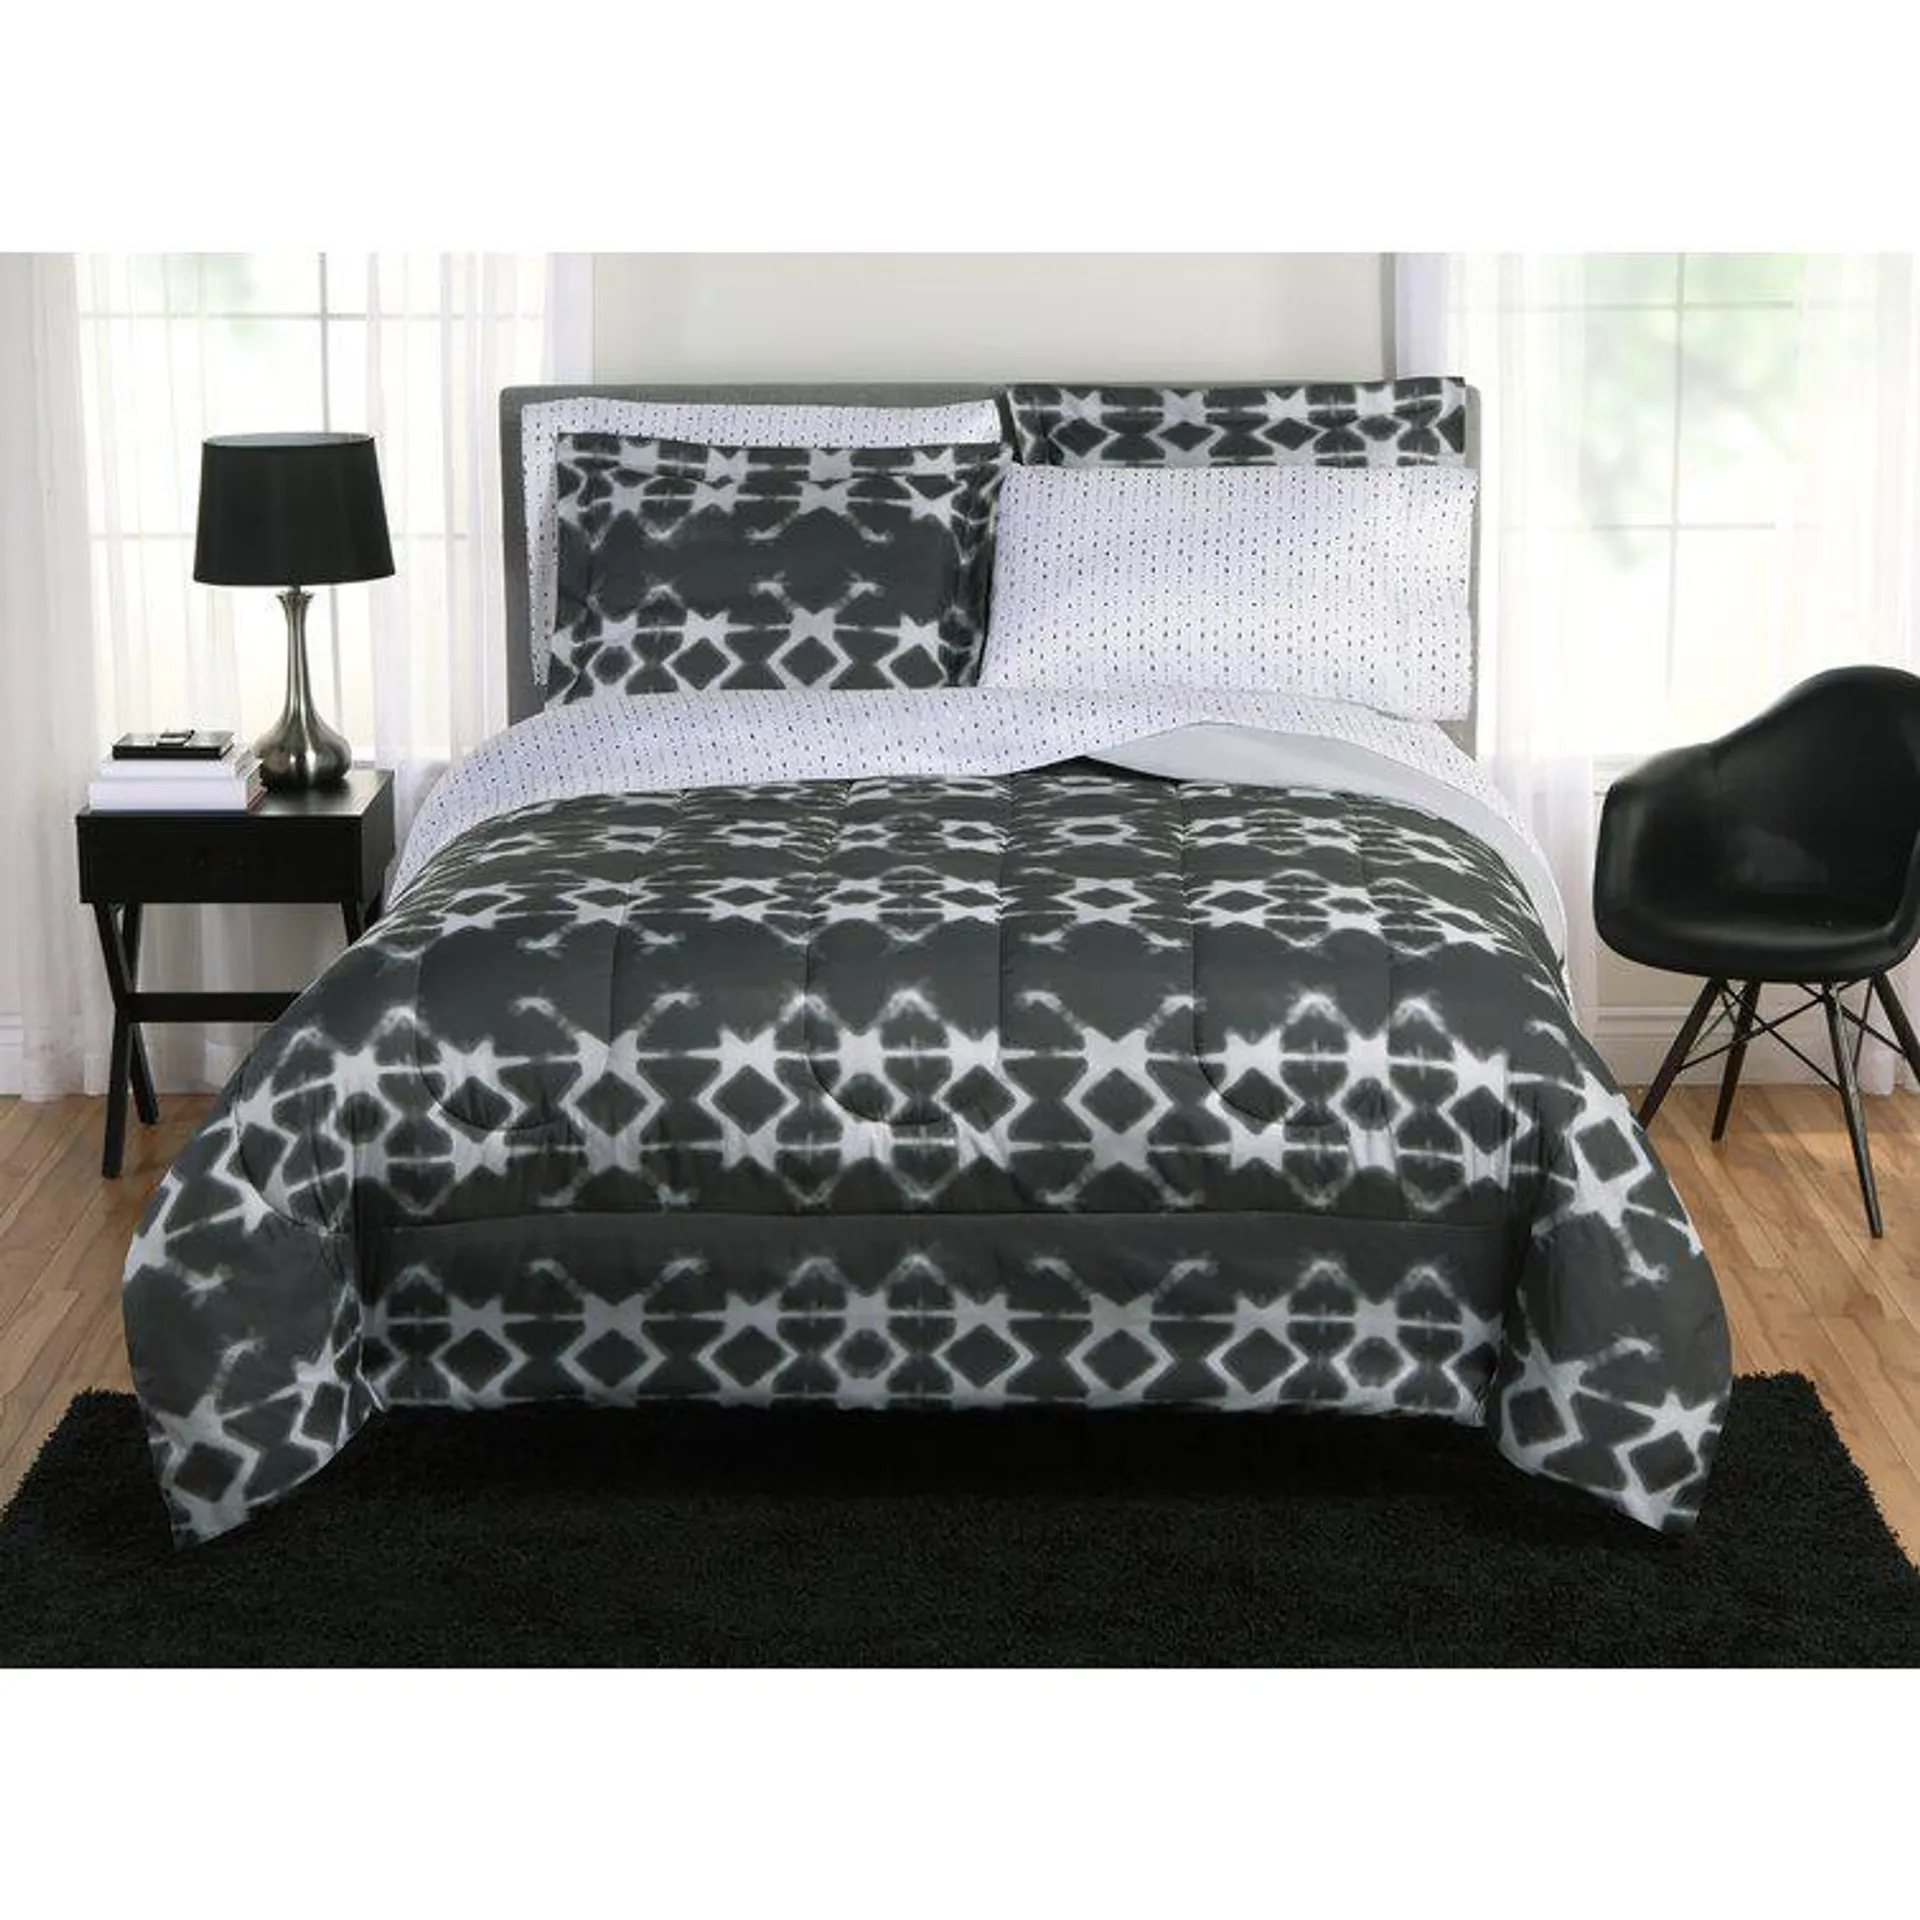 Beco Home Percale Abstract Comforter Set